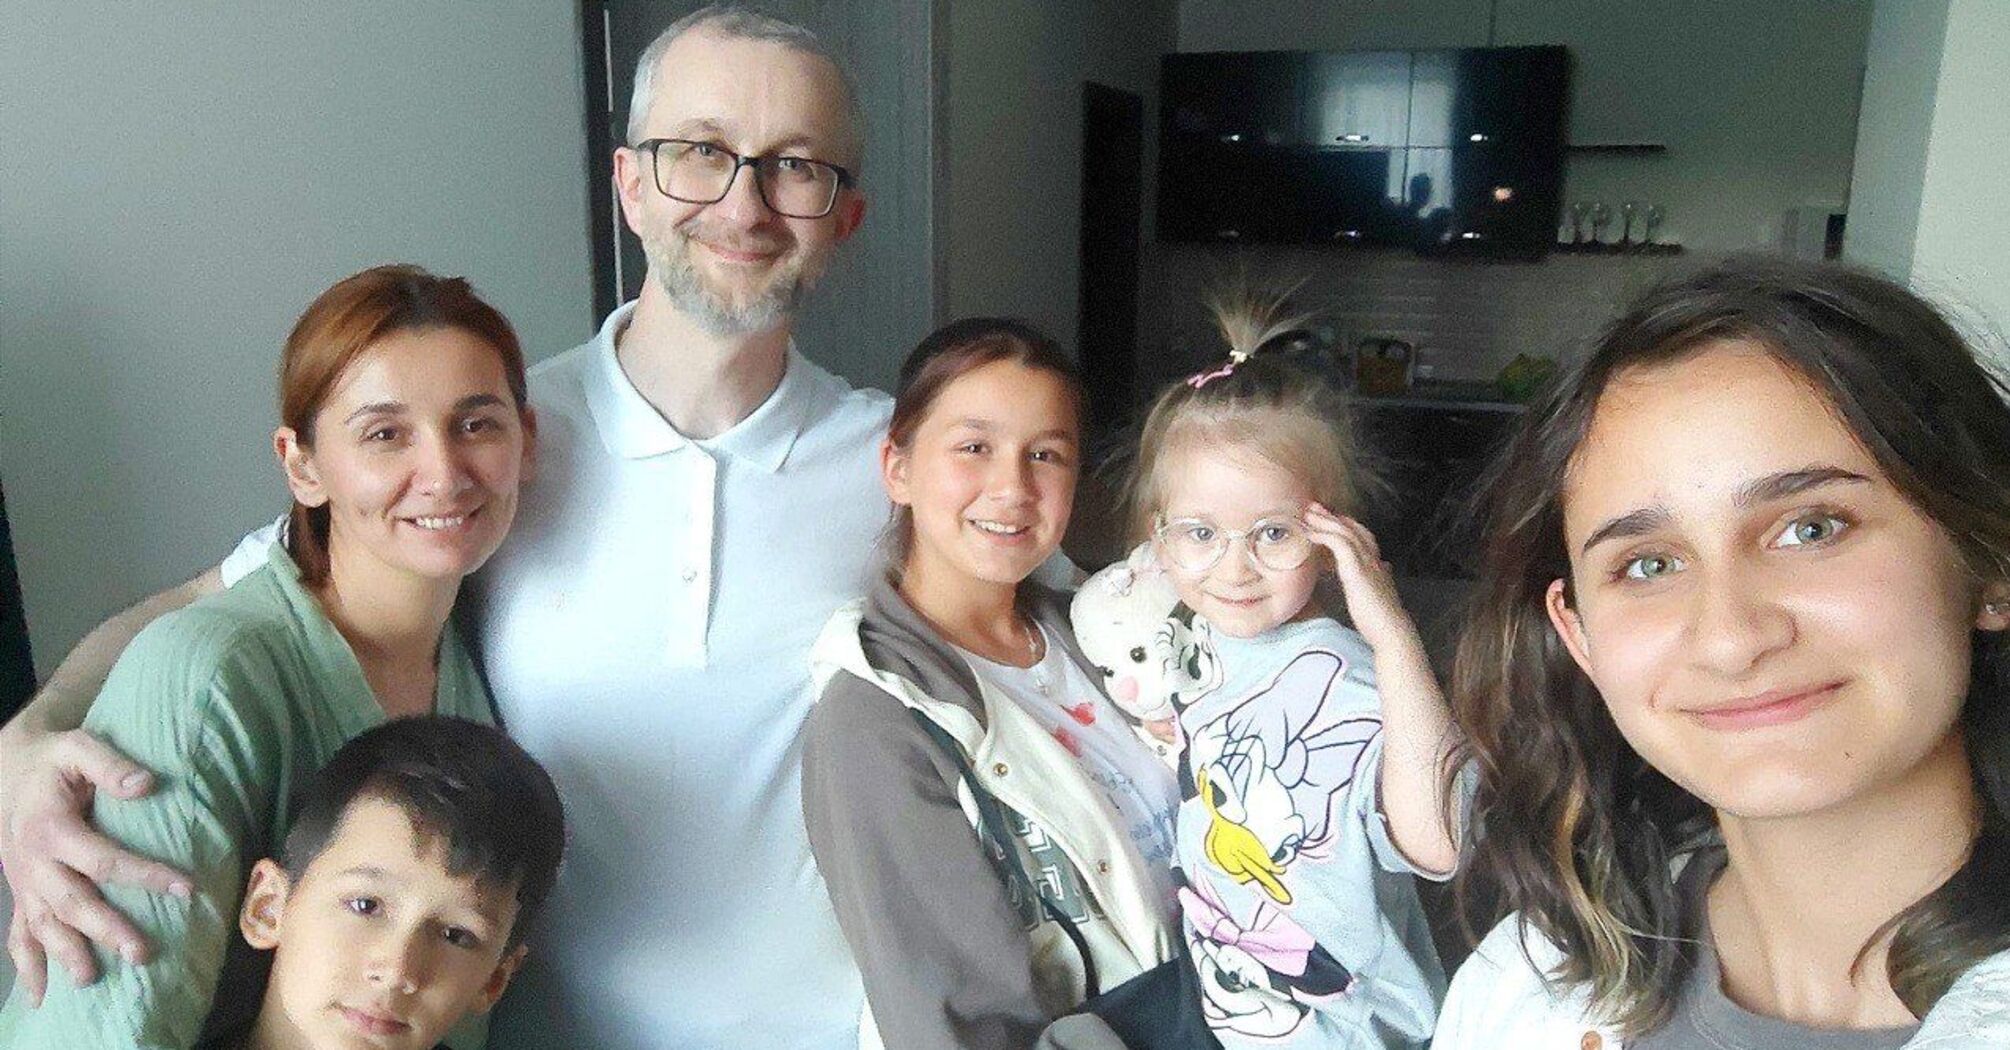 Released from Russian captivity Nariman Dzhelialov meets with his family. Touching photos